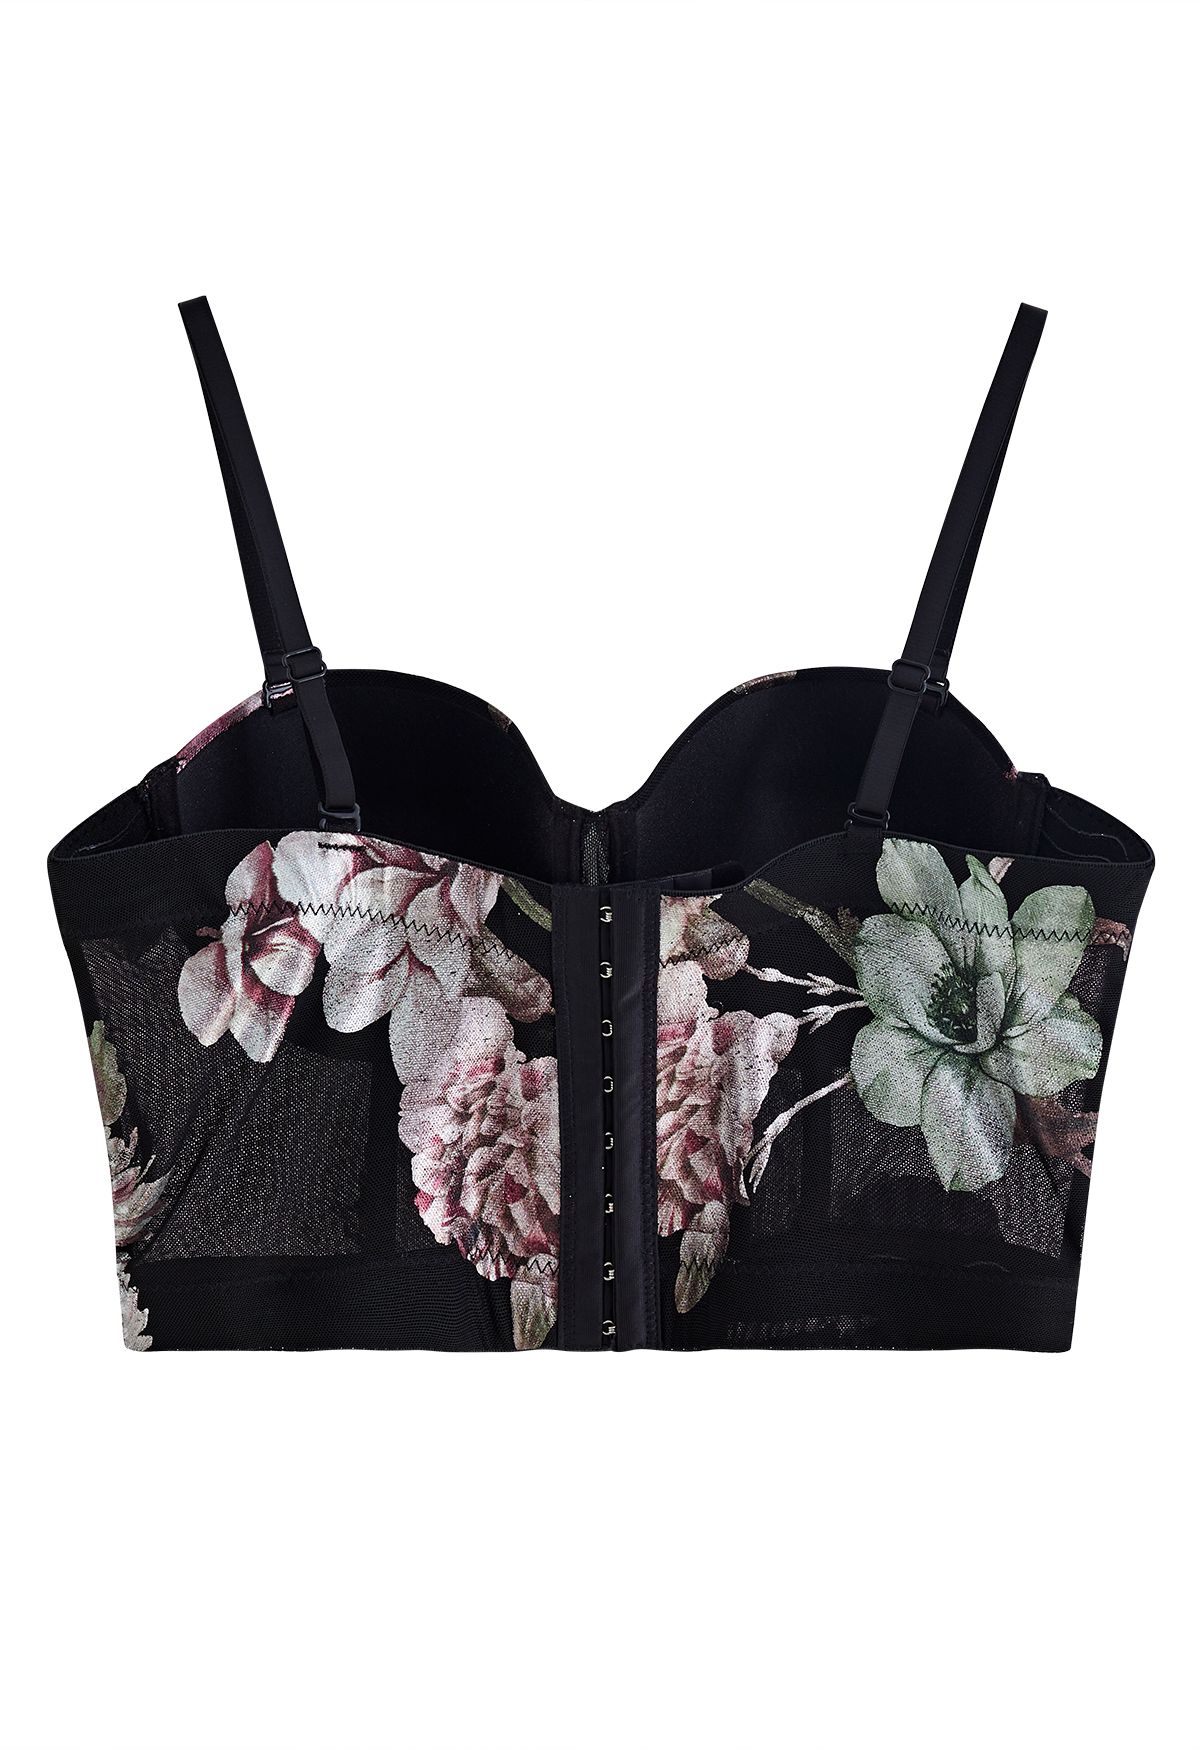 Blooming Flower Bustier Crop Top in Black - Retro, Indie and Unique Fashion